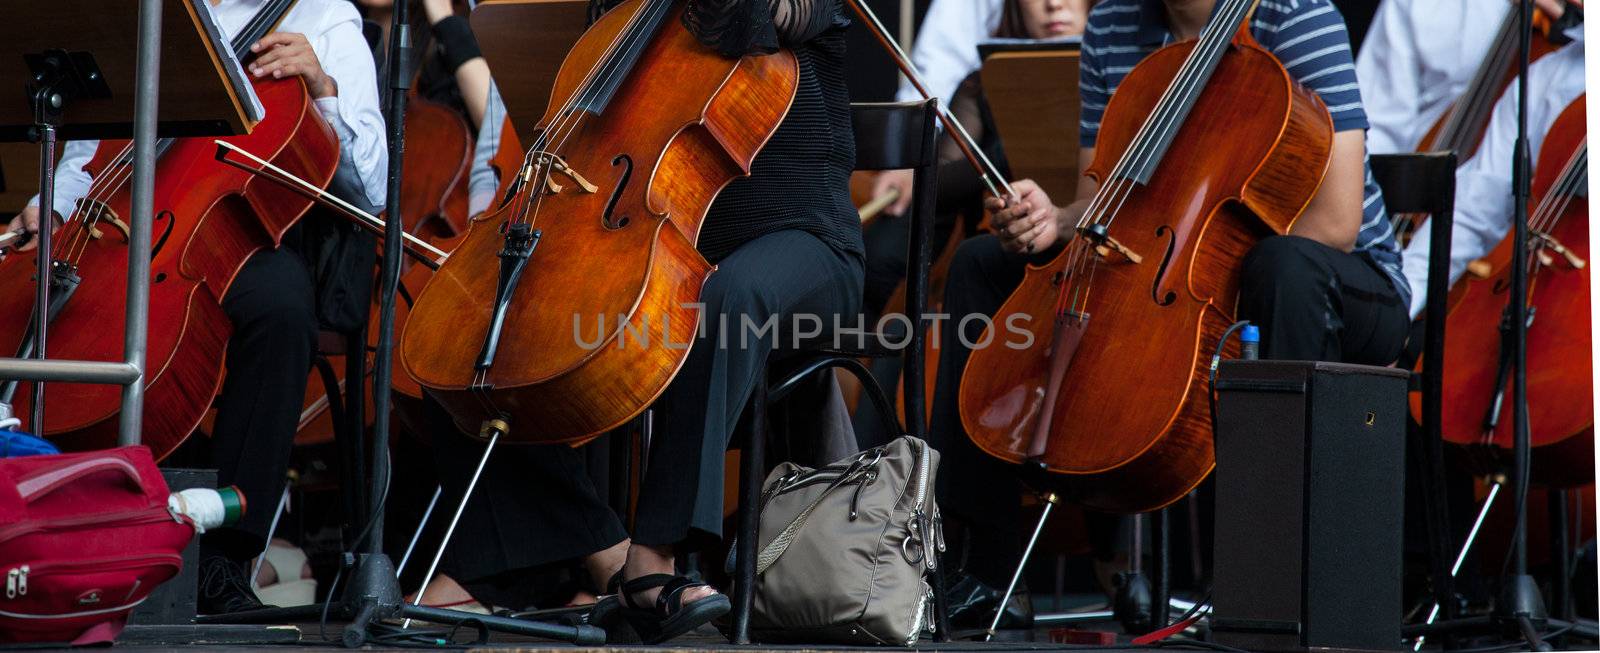 View of the Orchestra in concert - Cello musical instrument